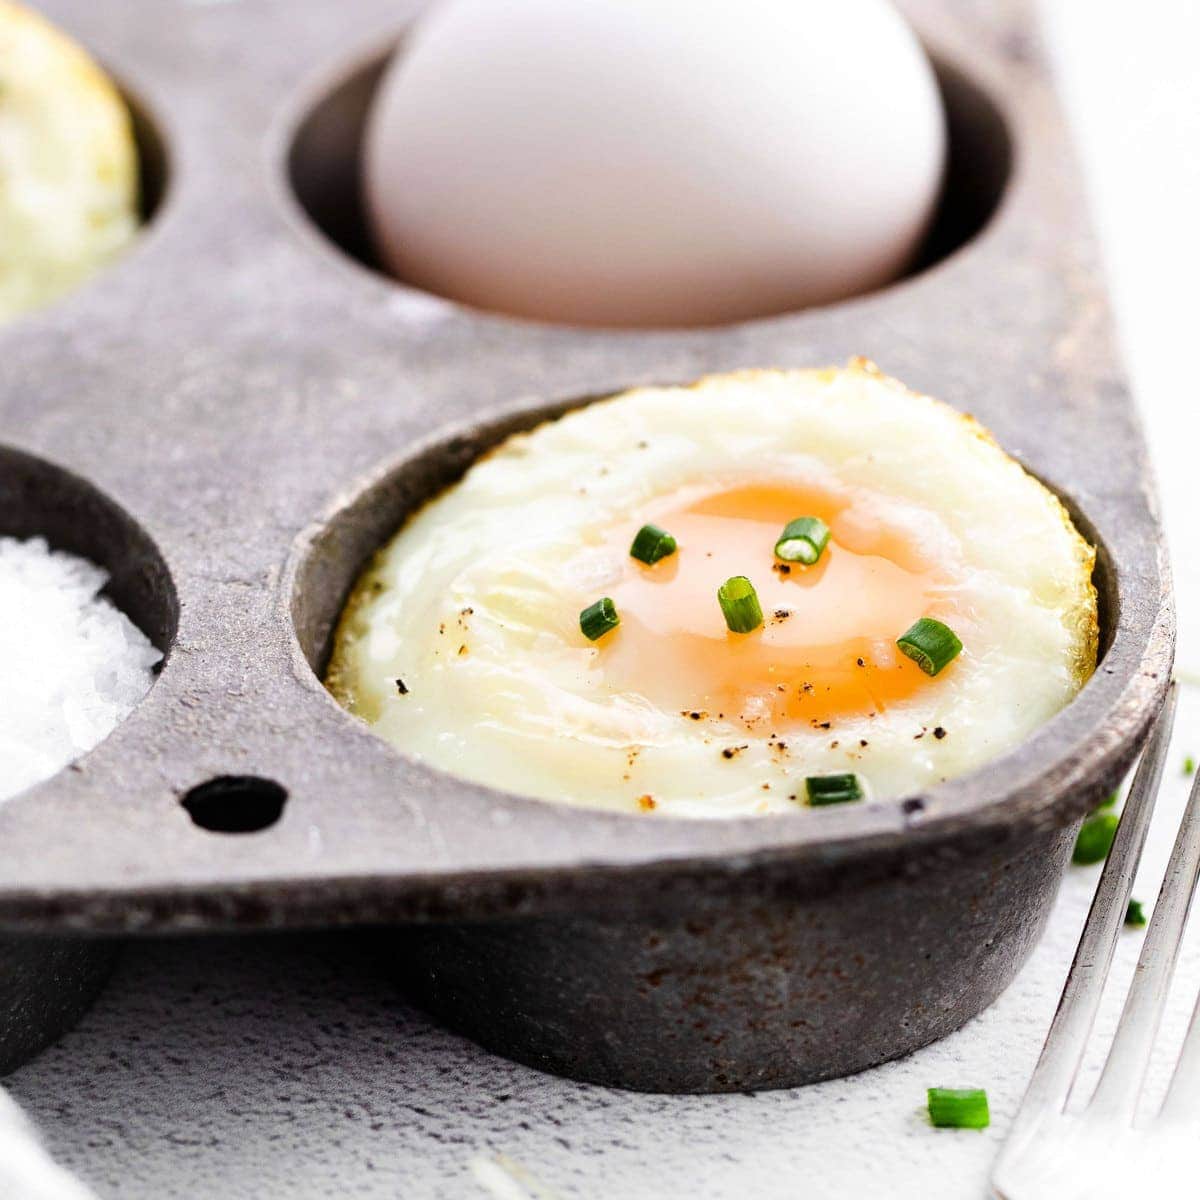 Oven Baked Eggs (ready in 15 minutes!) - Fit Foodie Finds